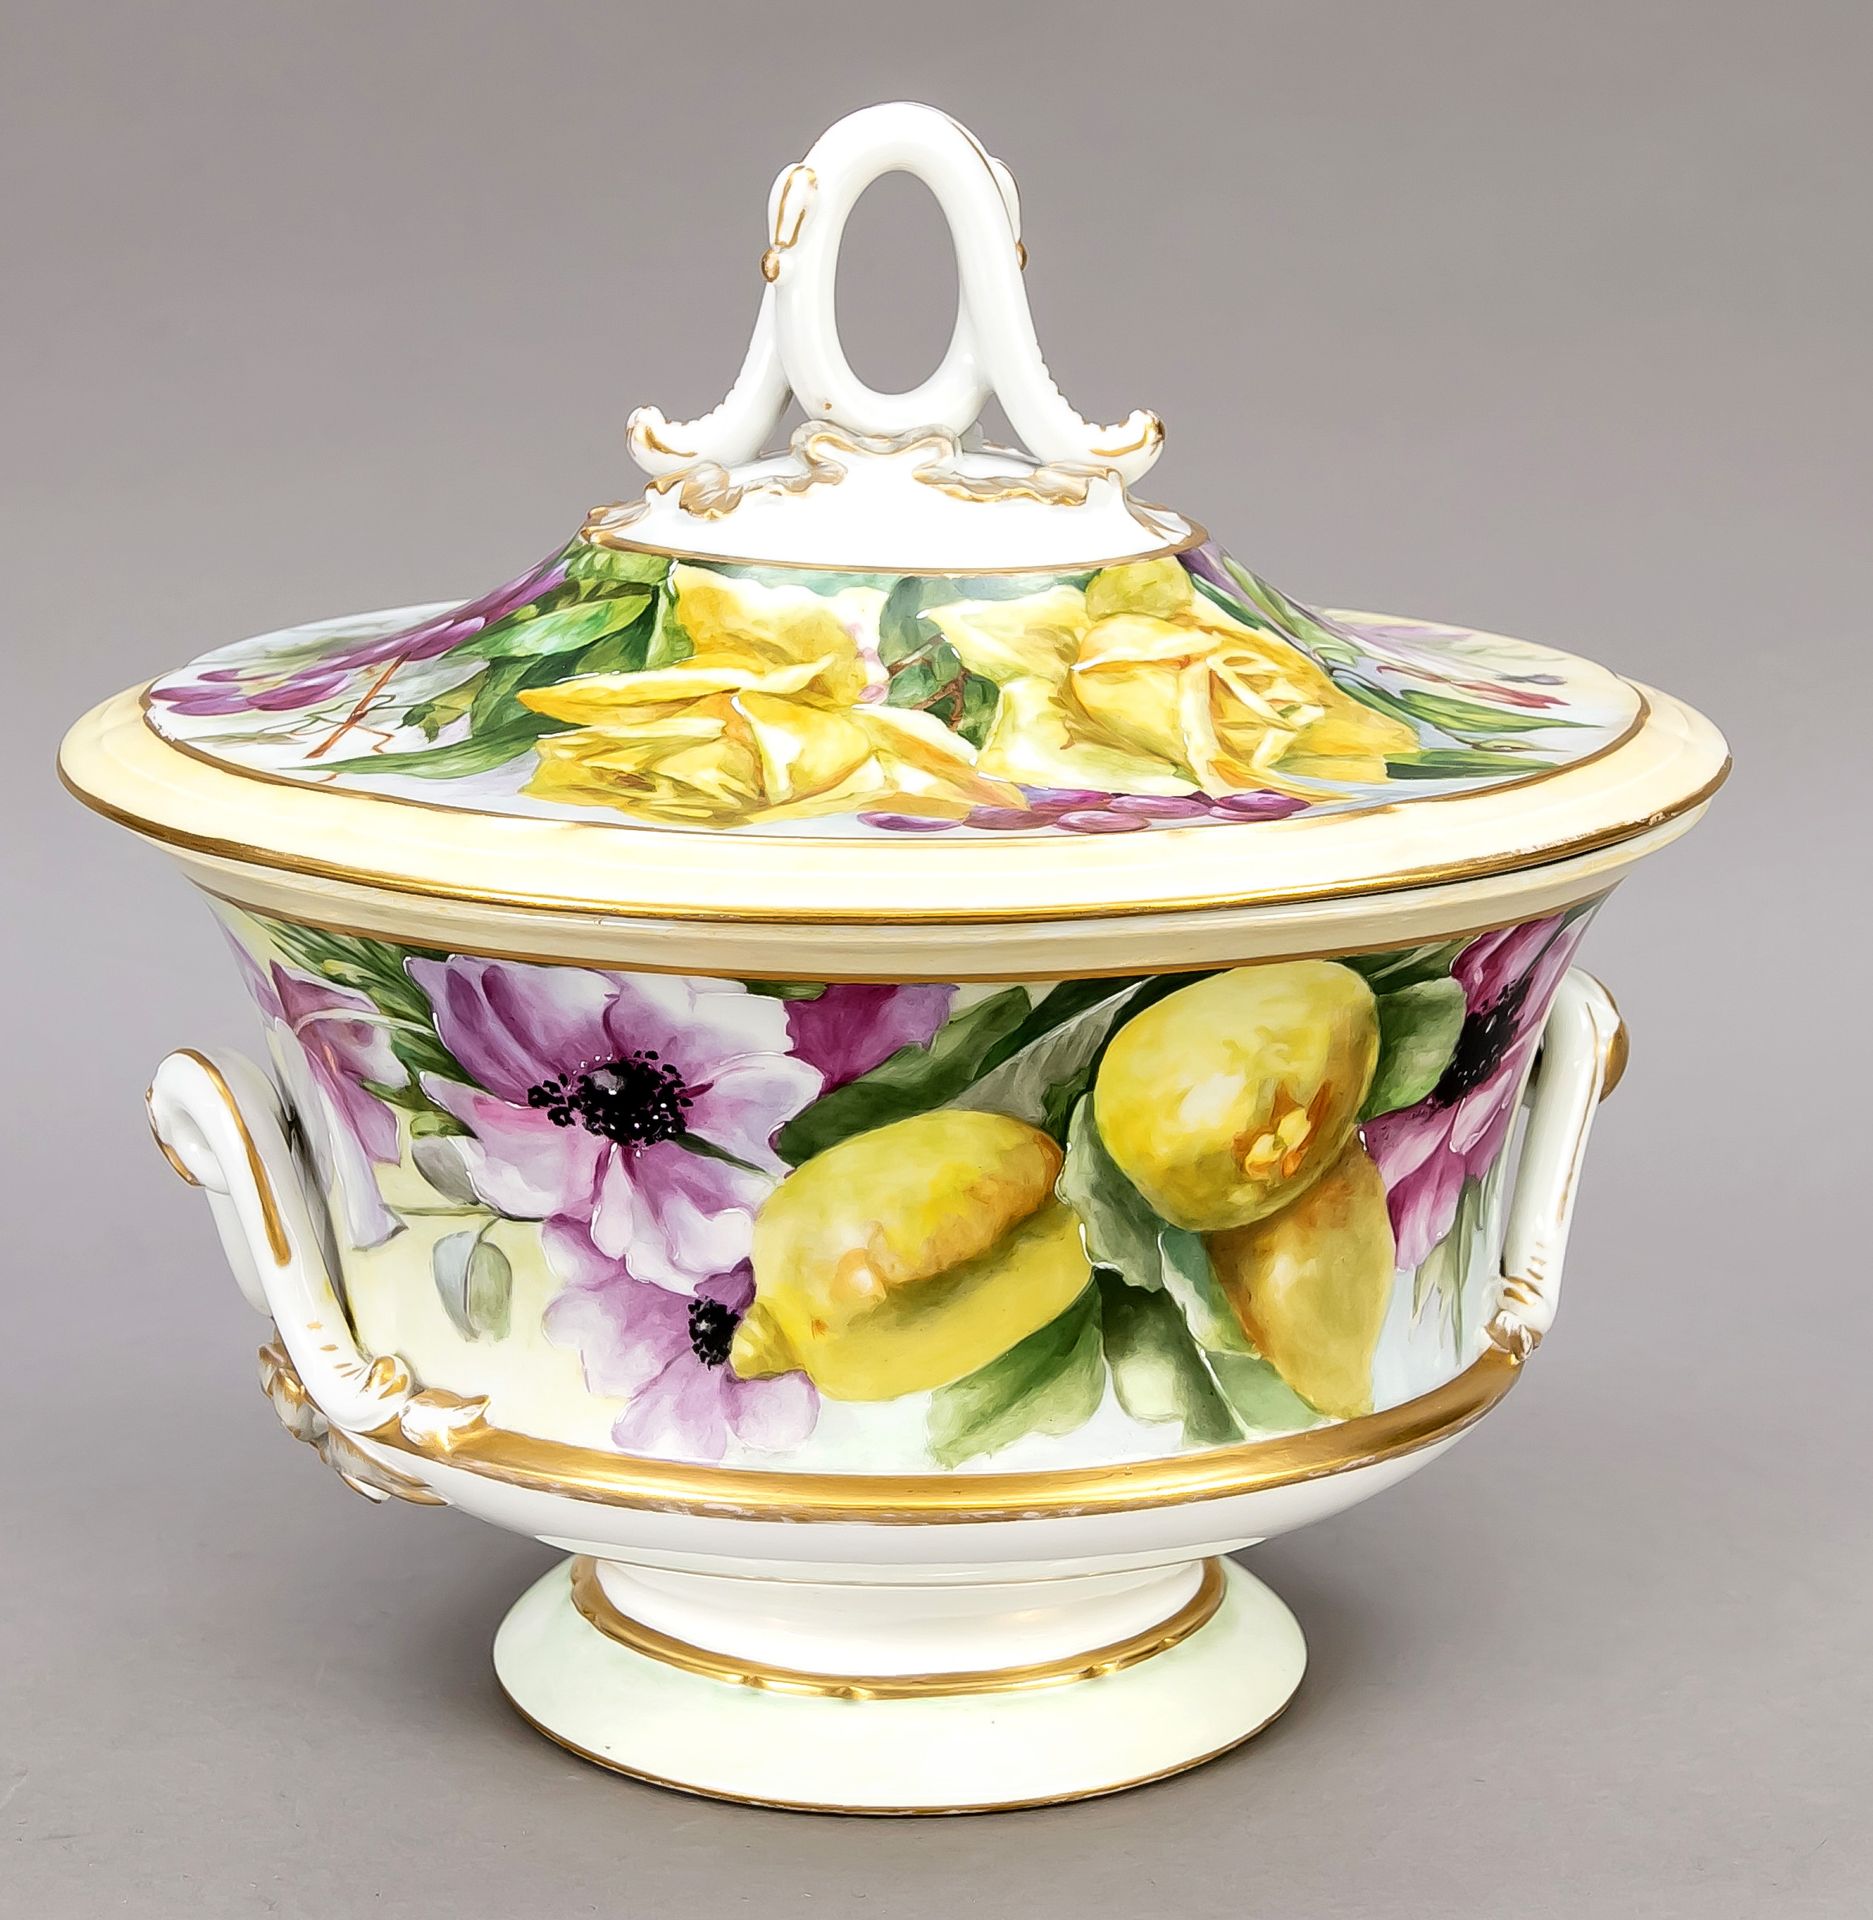 Null Lidded tureen, KPM Berlin, end of 19th century, cylindrical form with sligh&hellip;